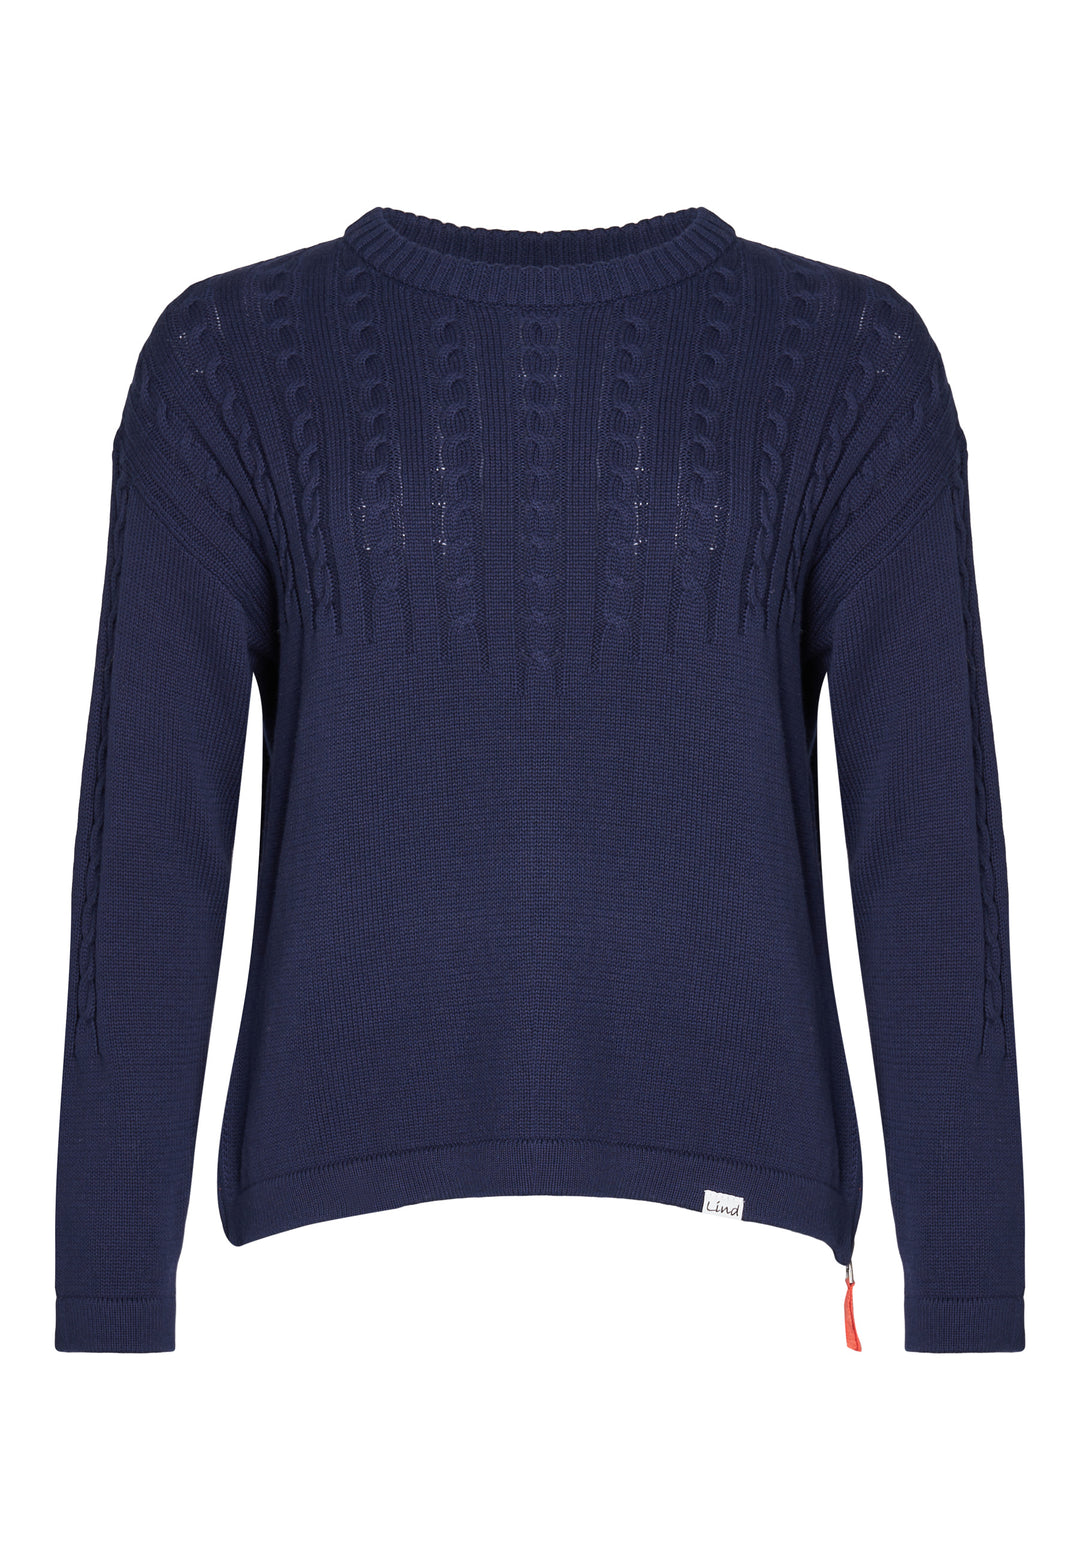 Lind LiMaxime Knit Pullover 5999 NAVY BLUE